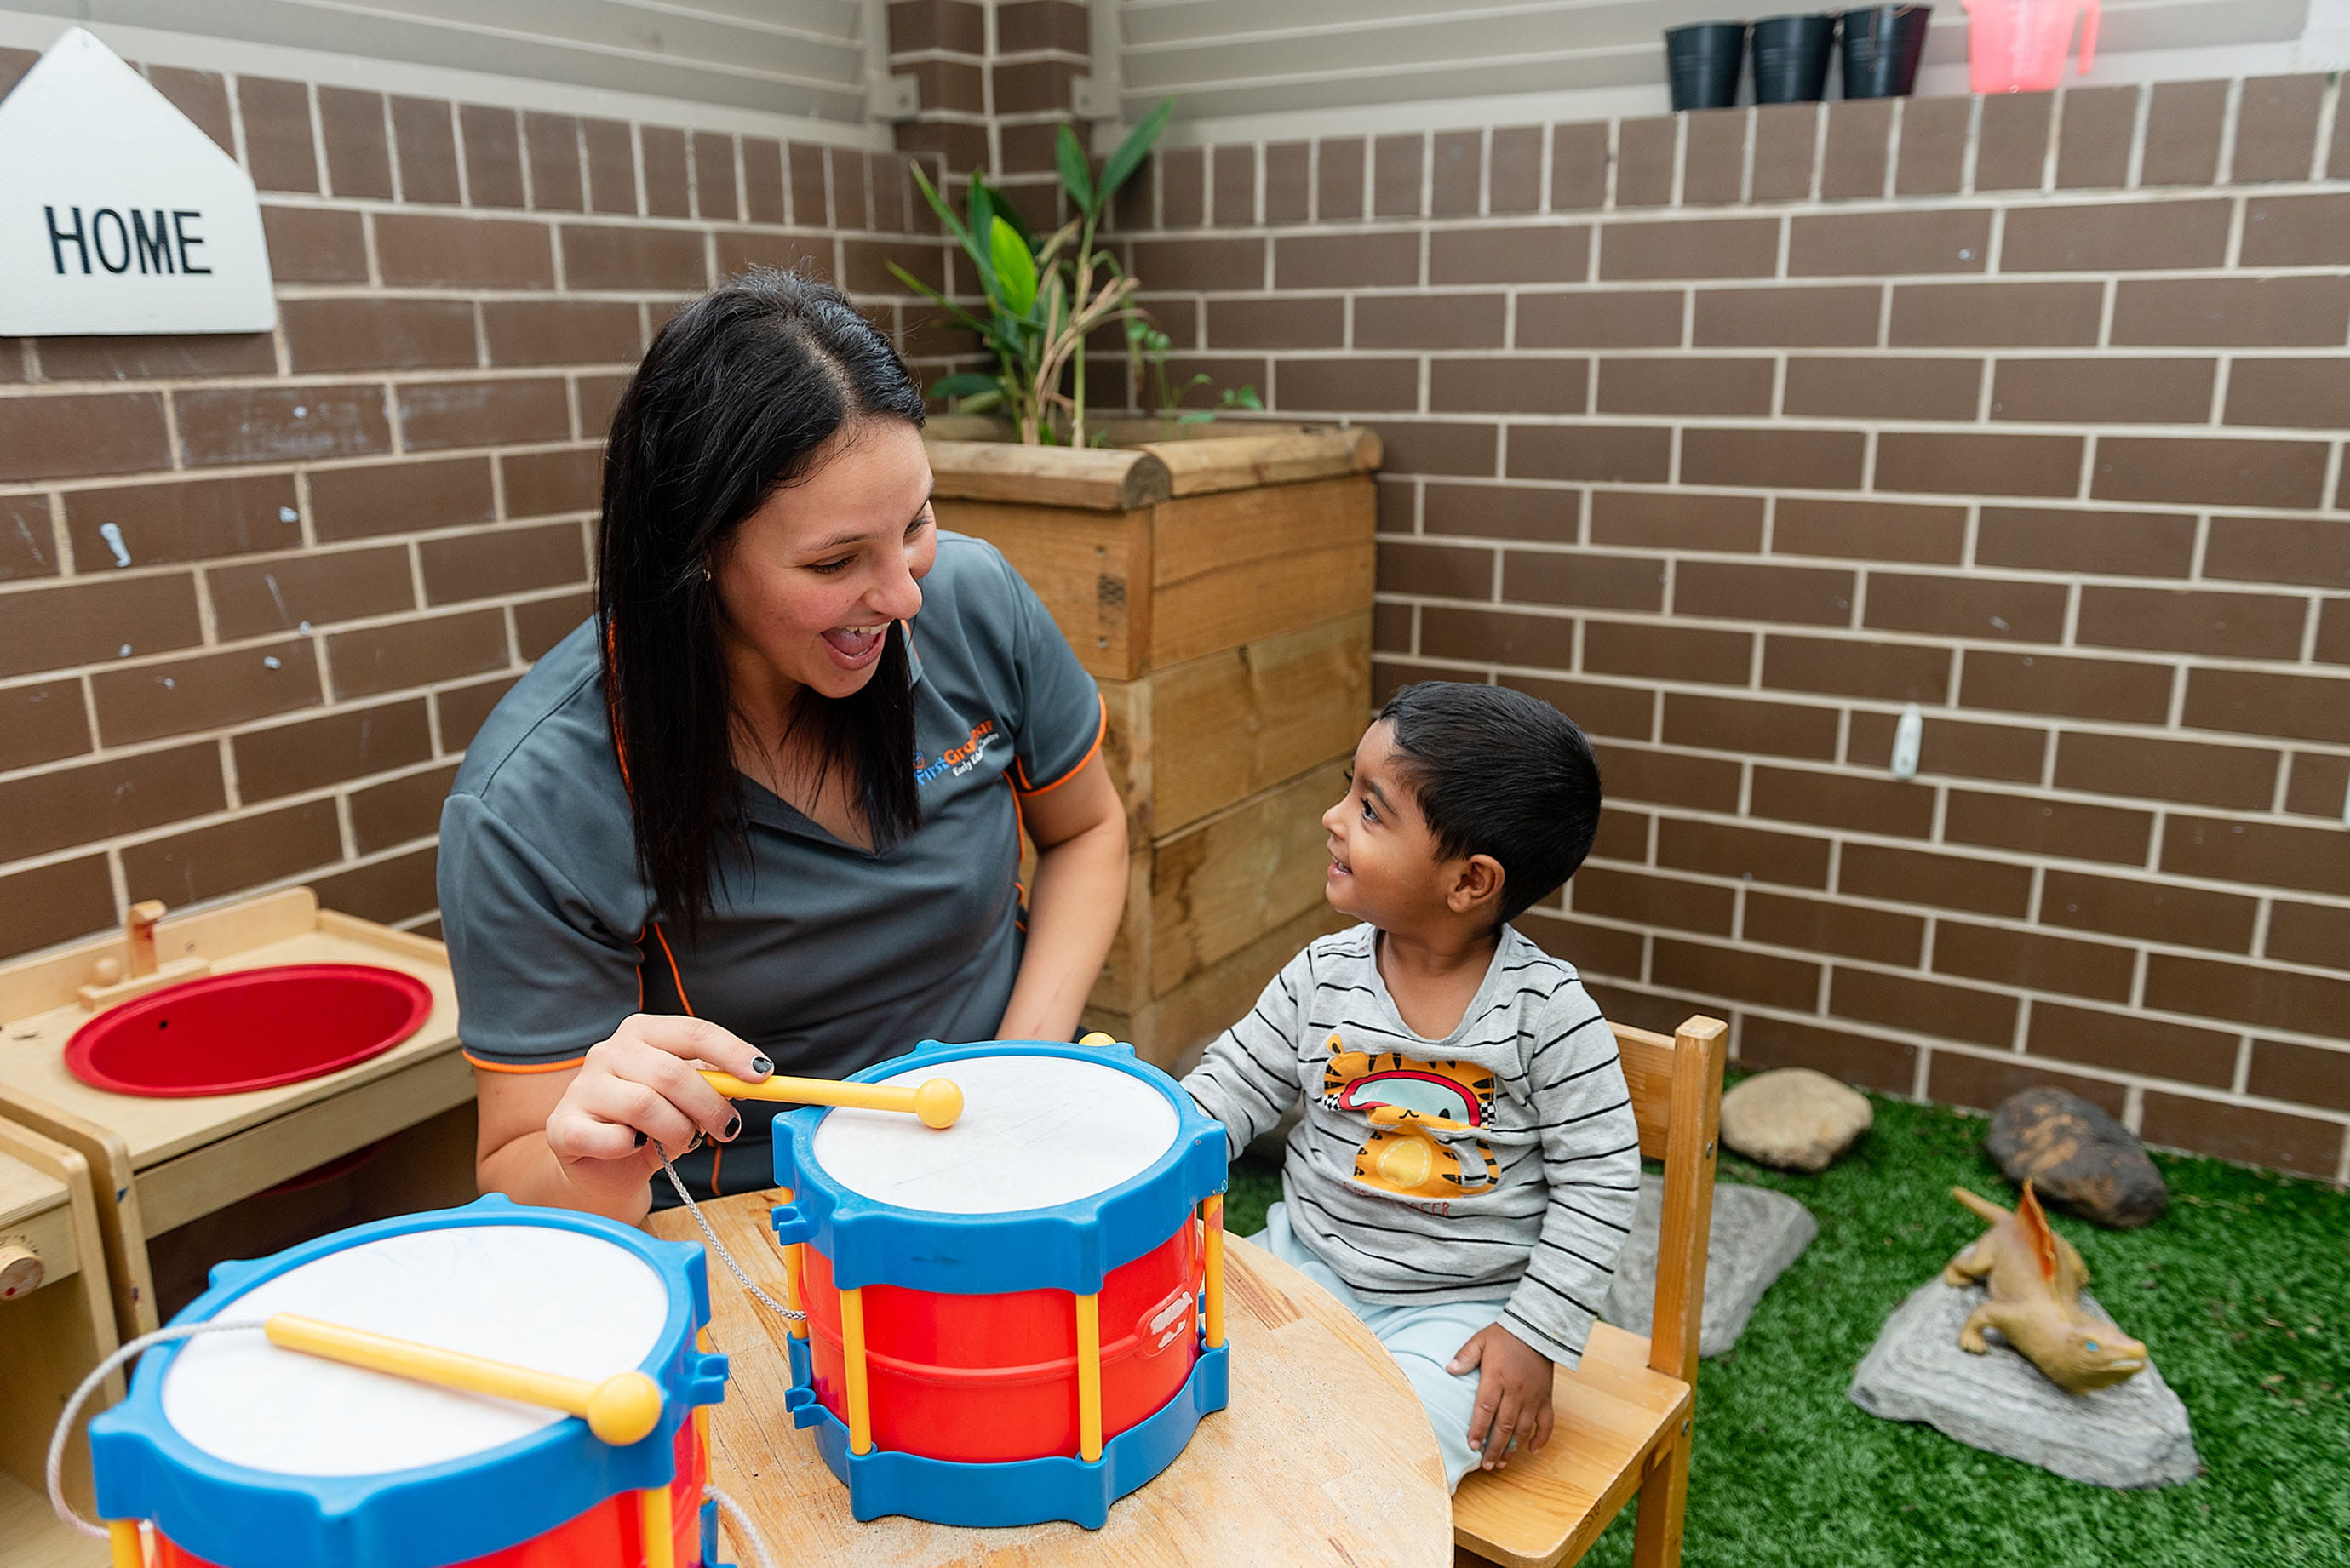 Day care educator playing drums with a child